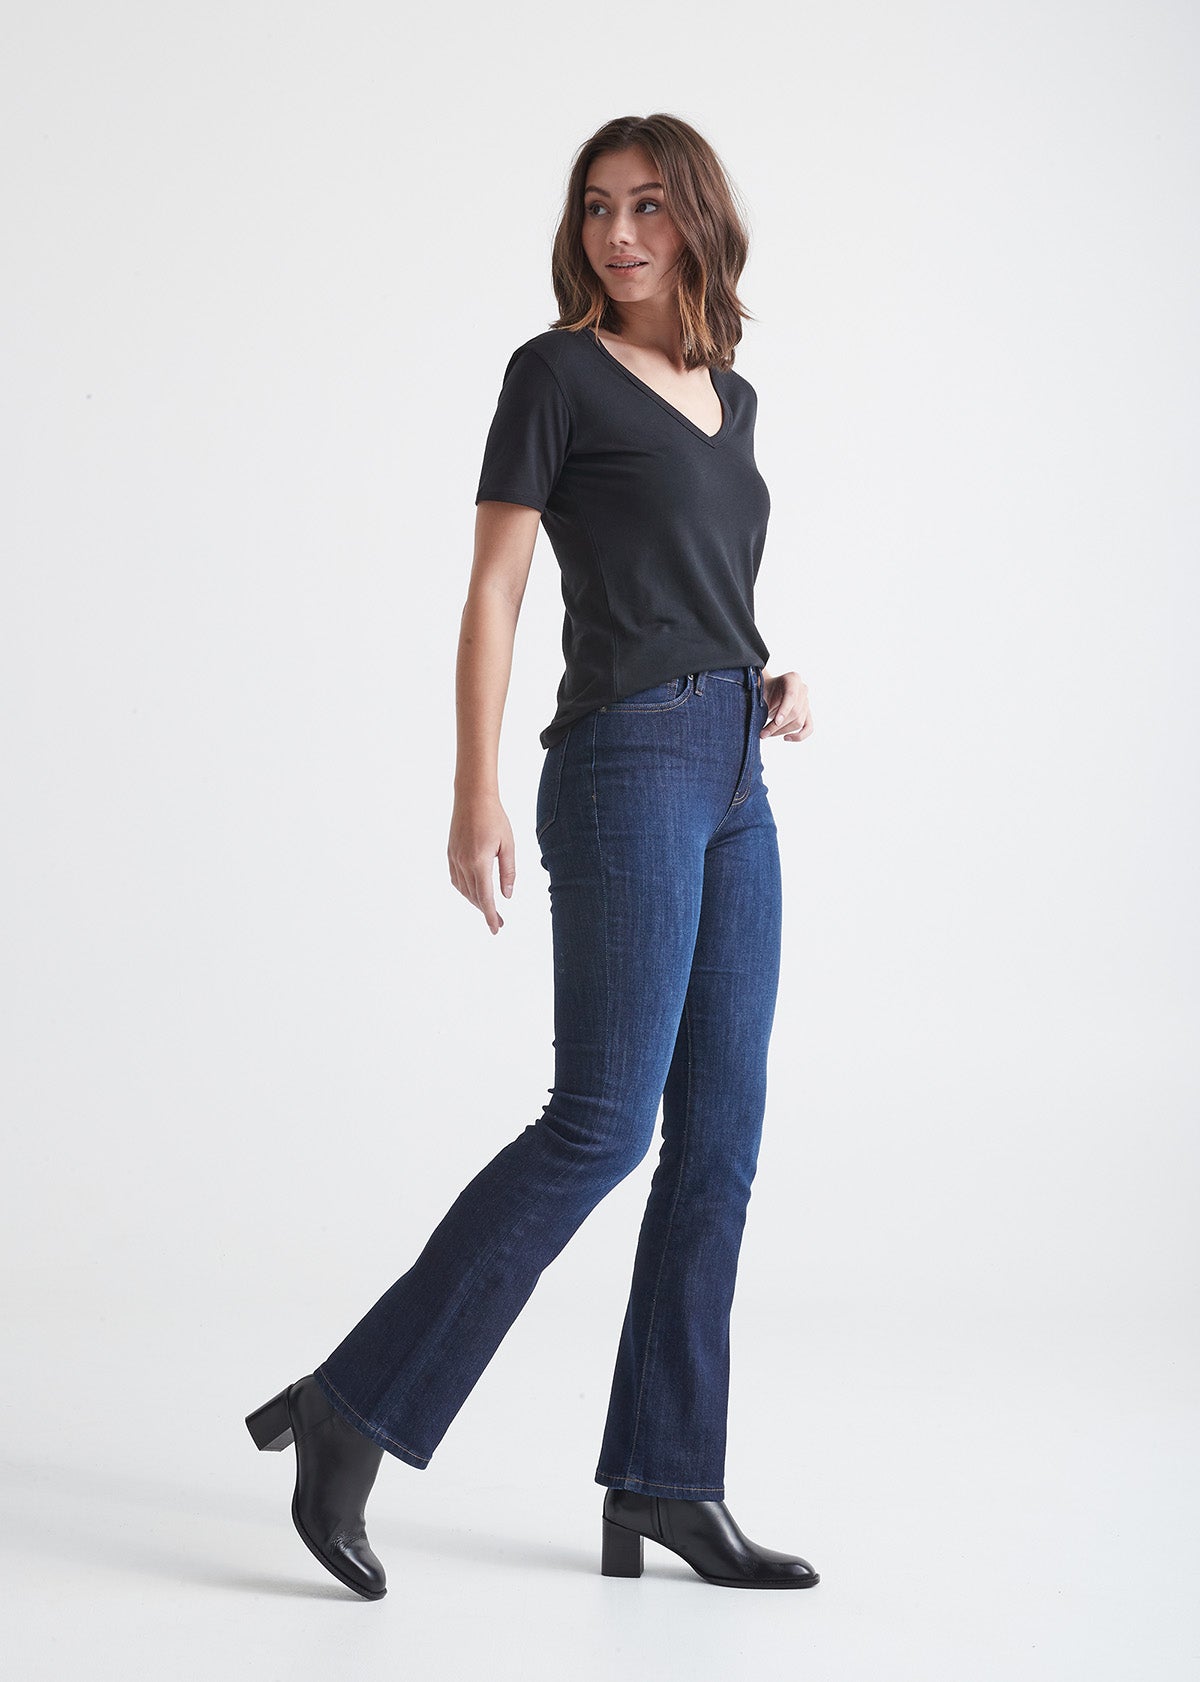 Women's High-Rise Jeans